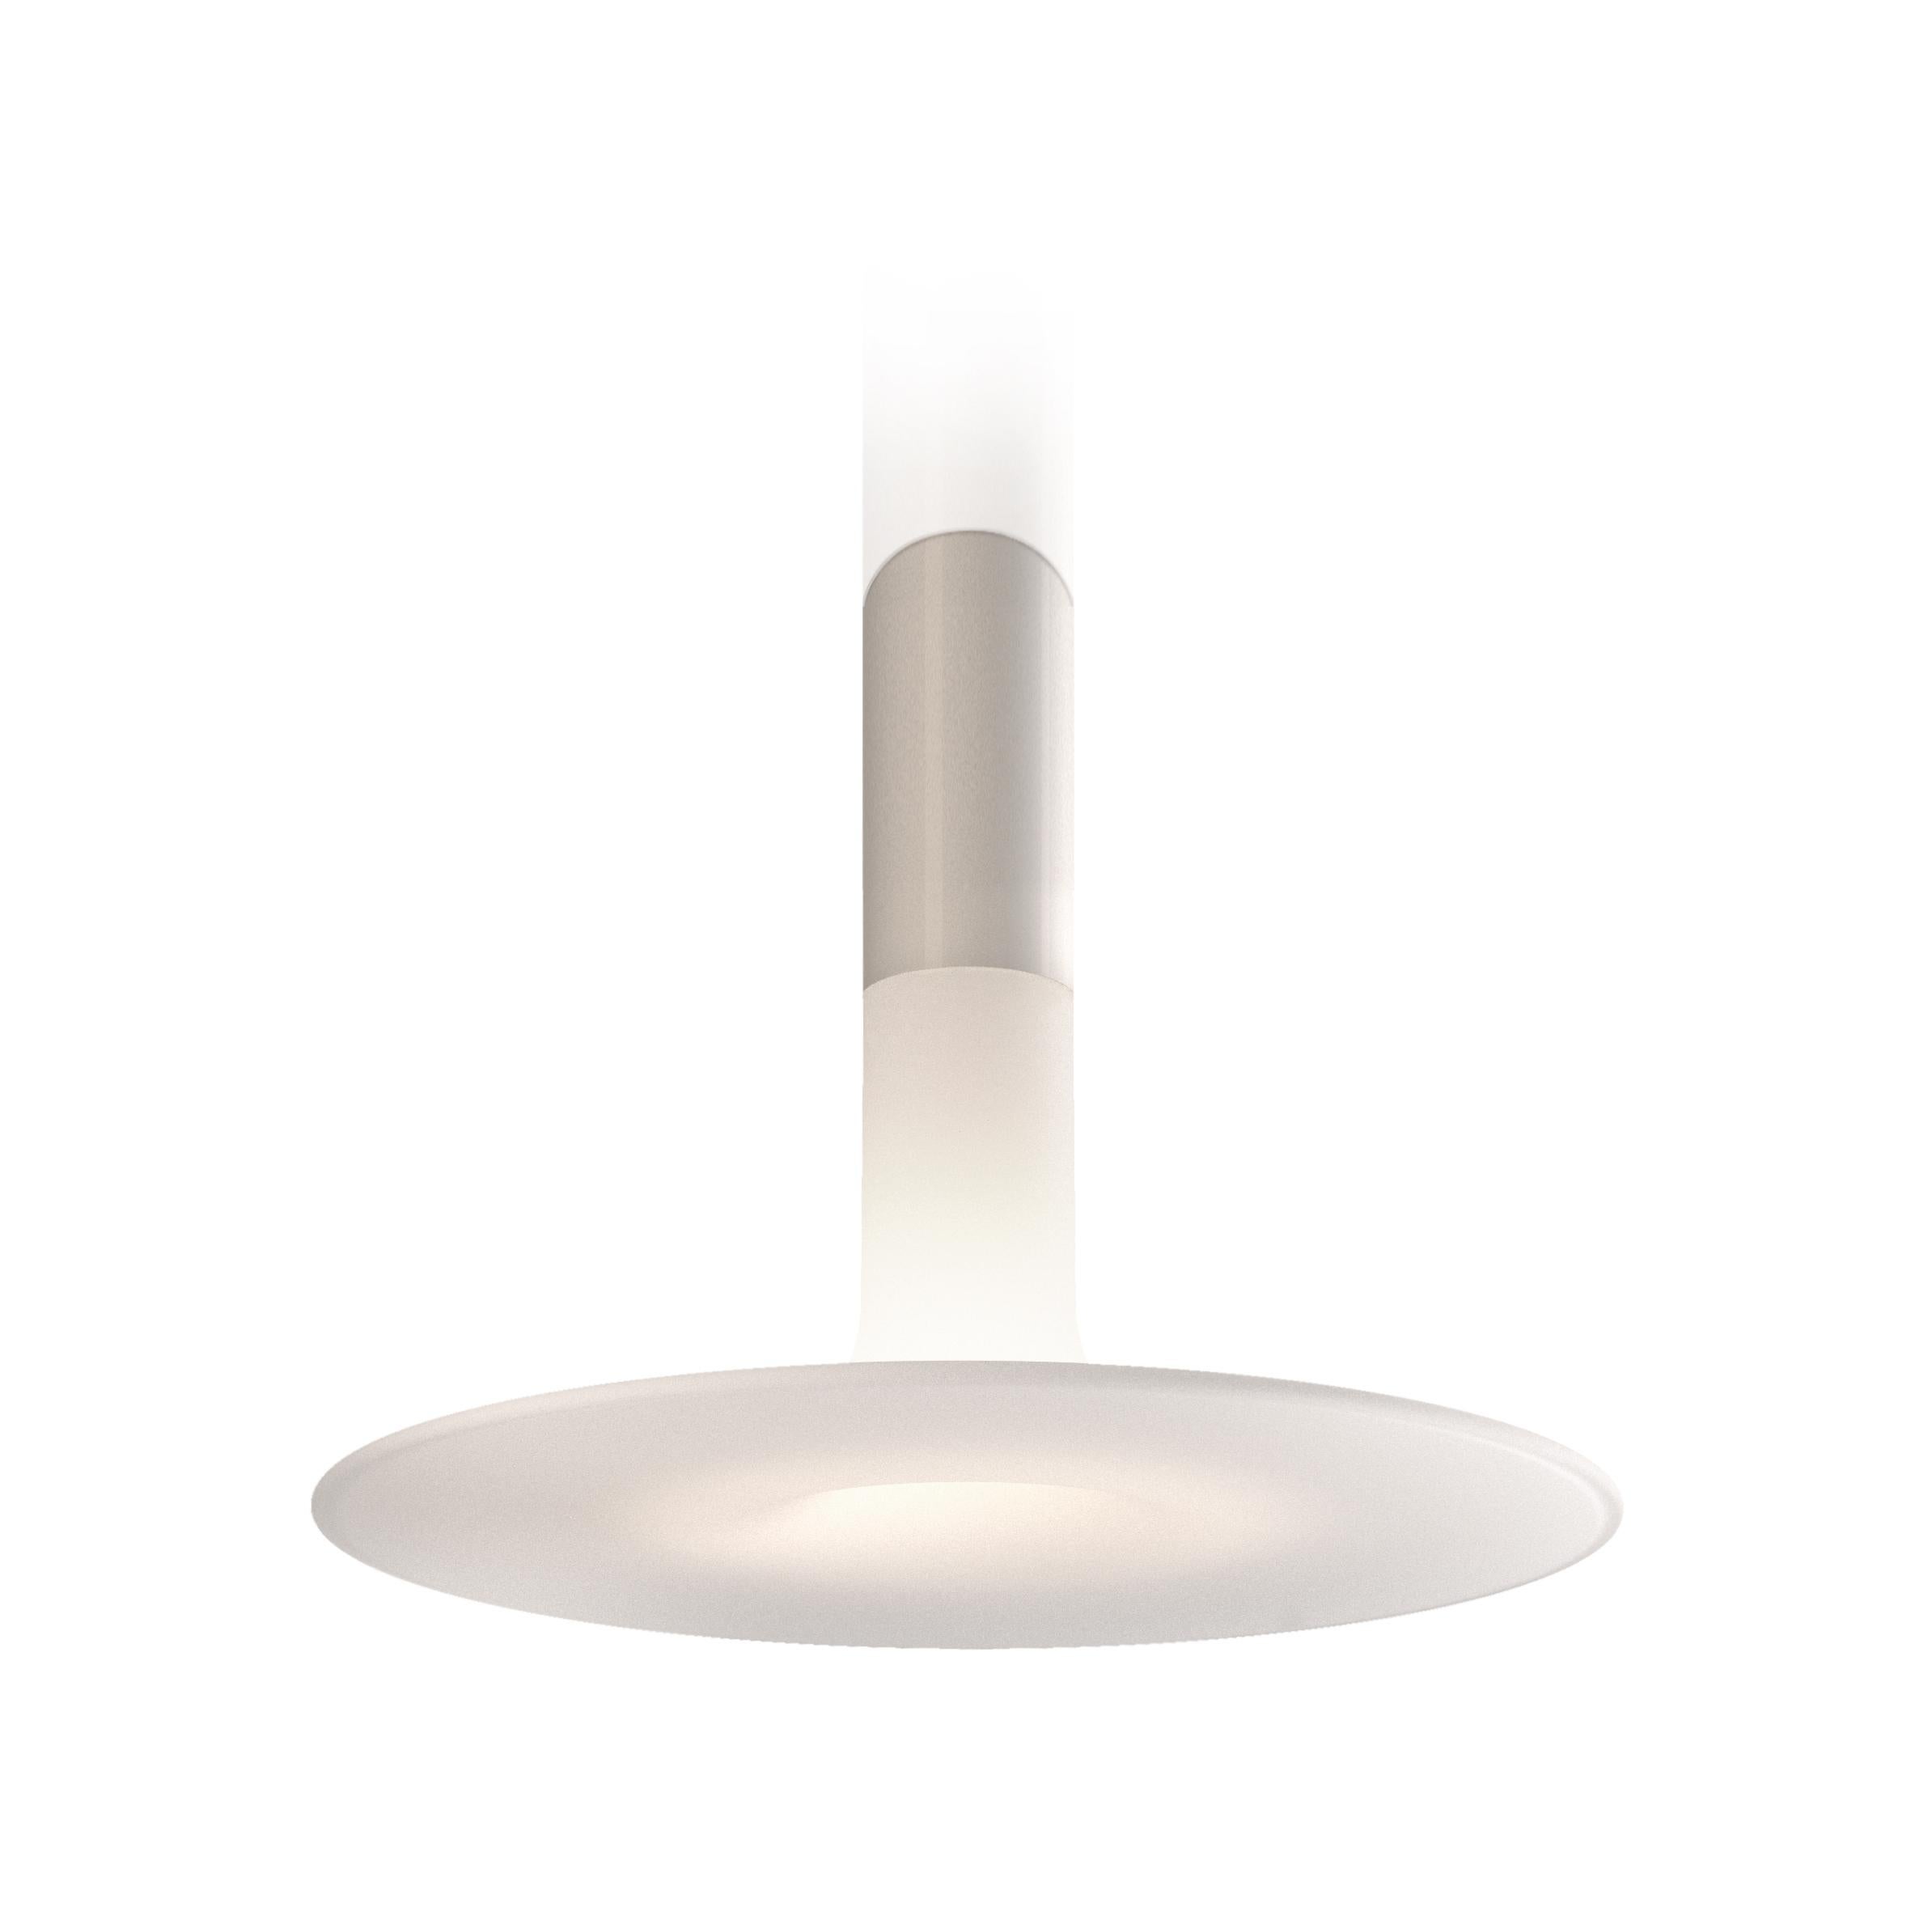 Contemporary 'Louis 41' Ceiling Lamp by Studio 14 for KDLN For Sale